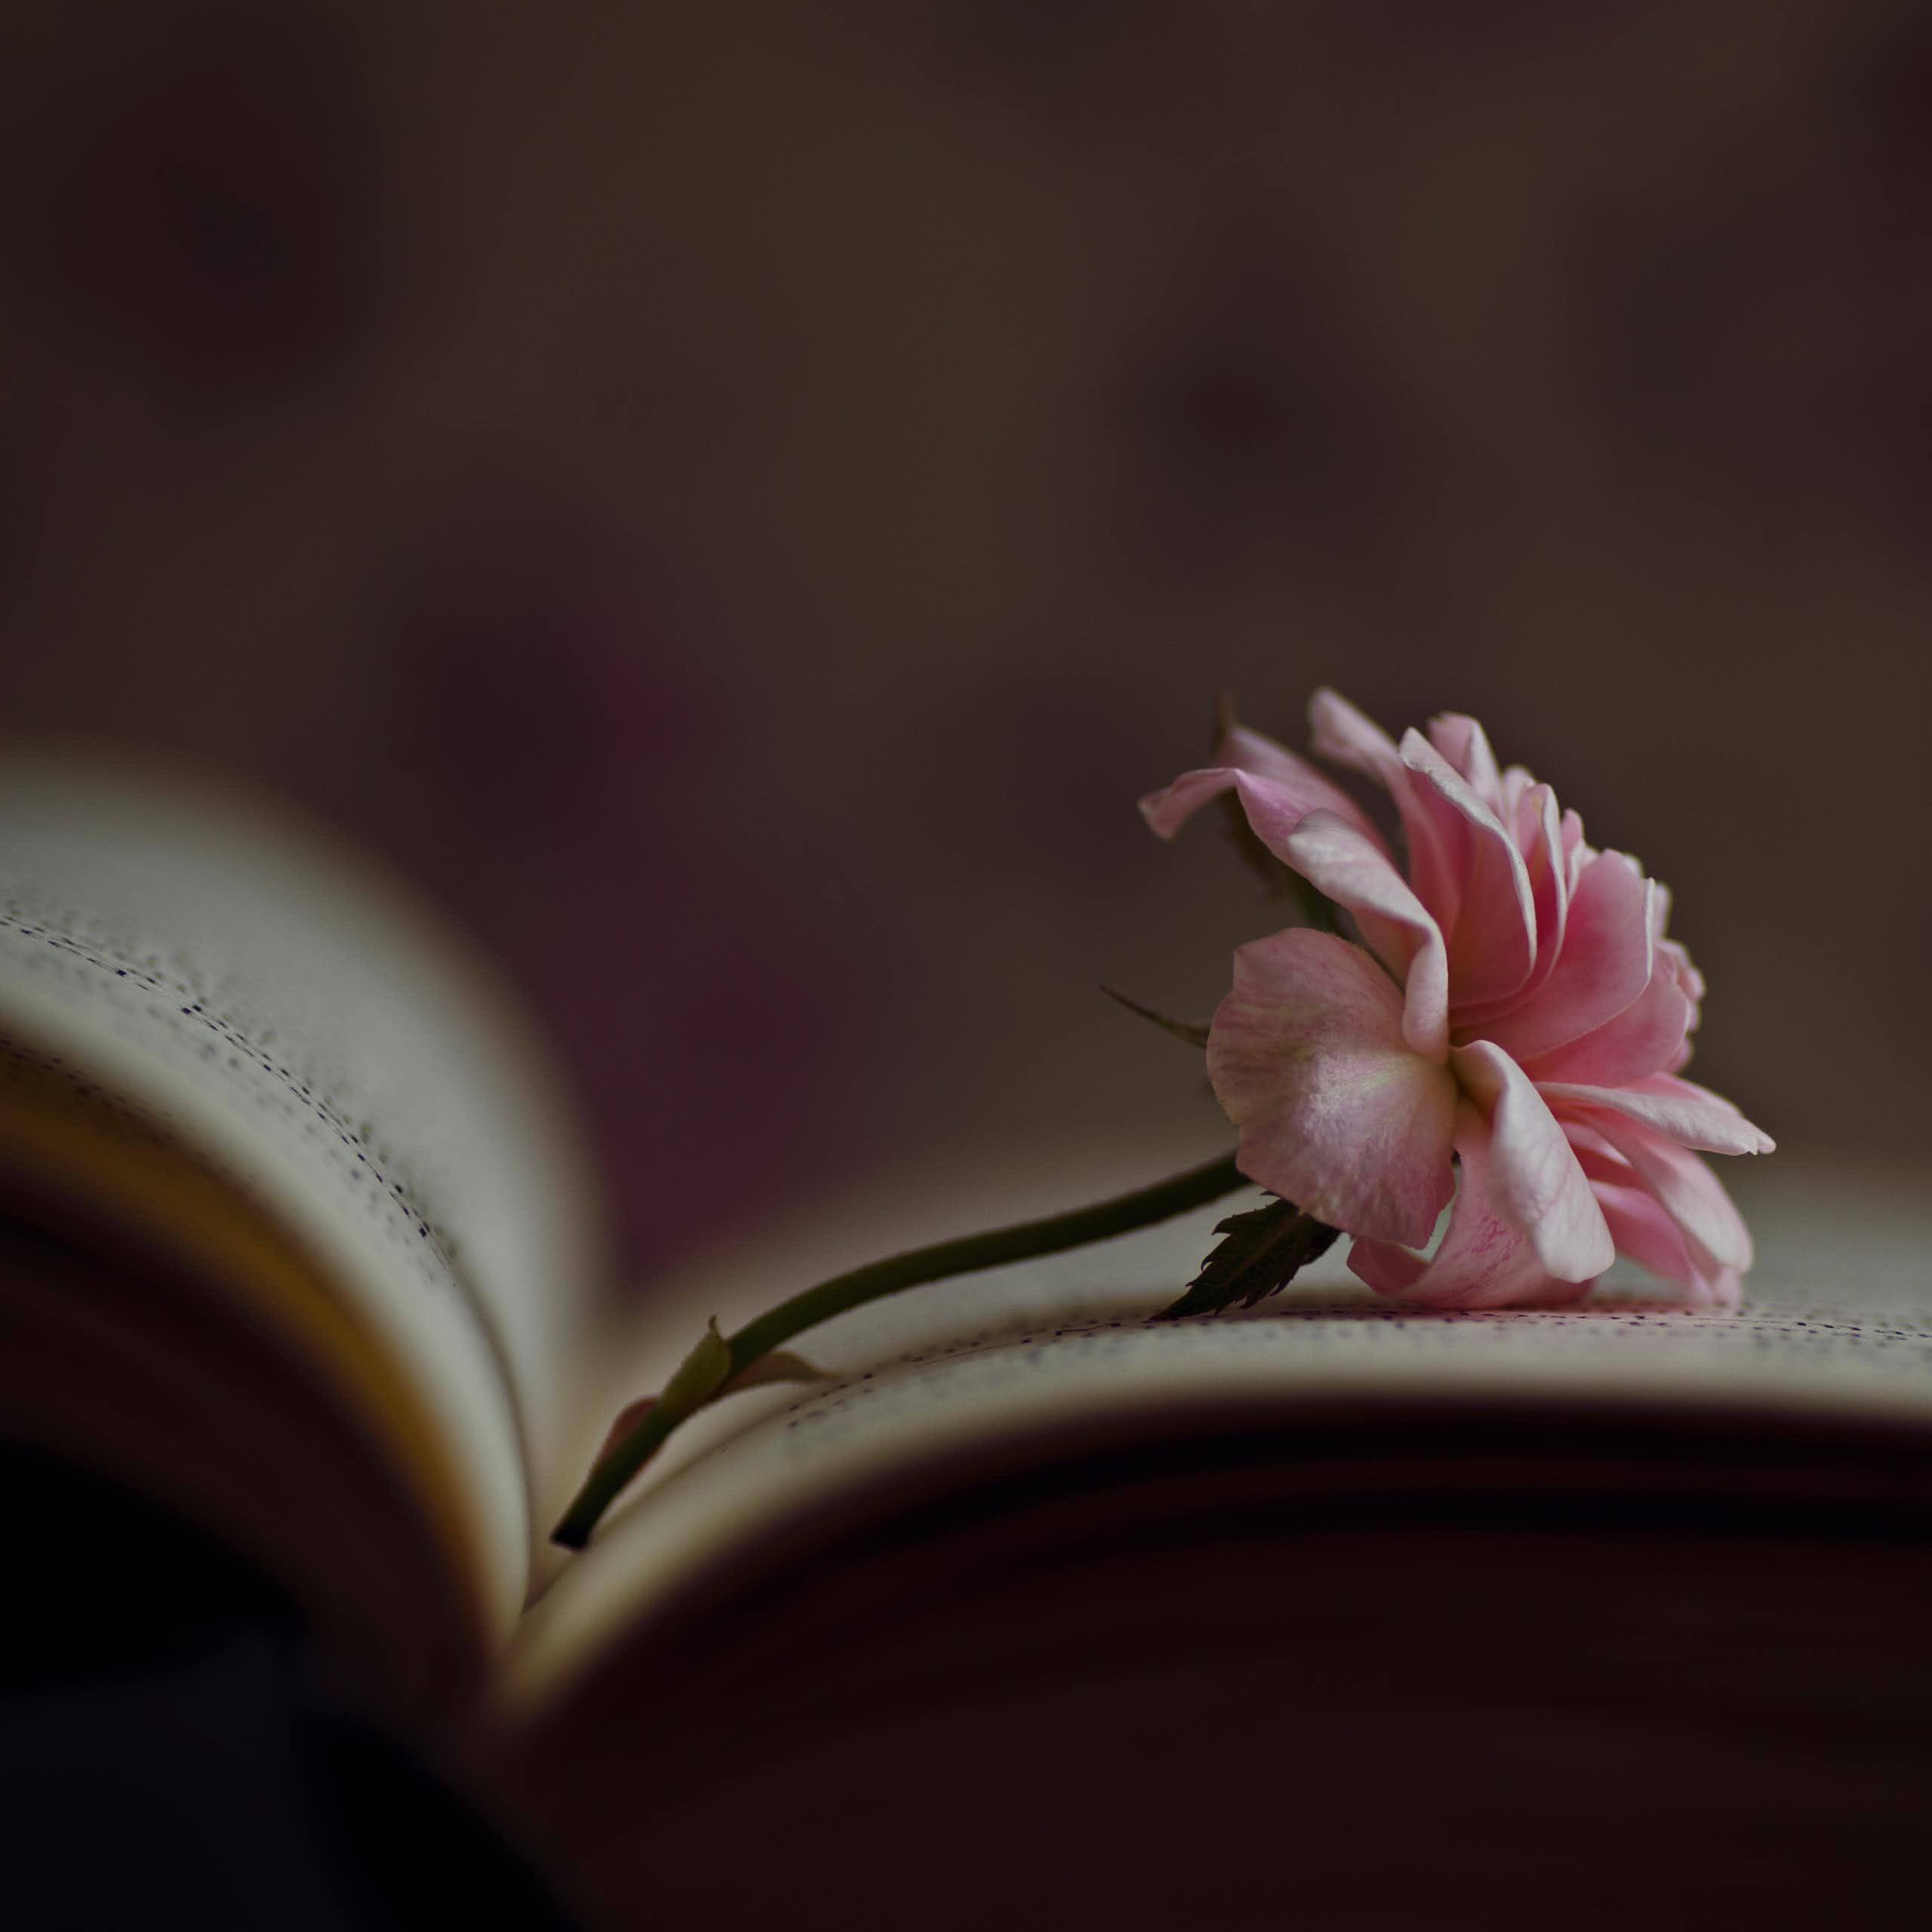 Open book with pink rose resting on one of the pages.